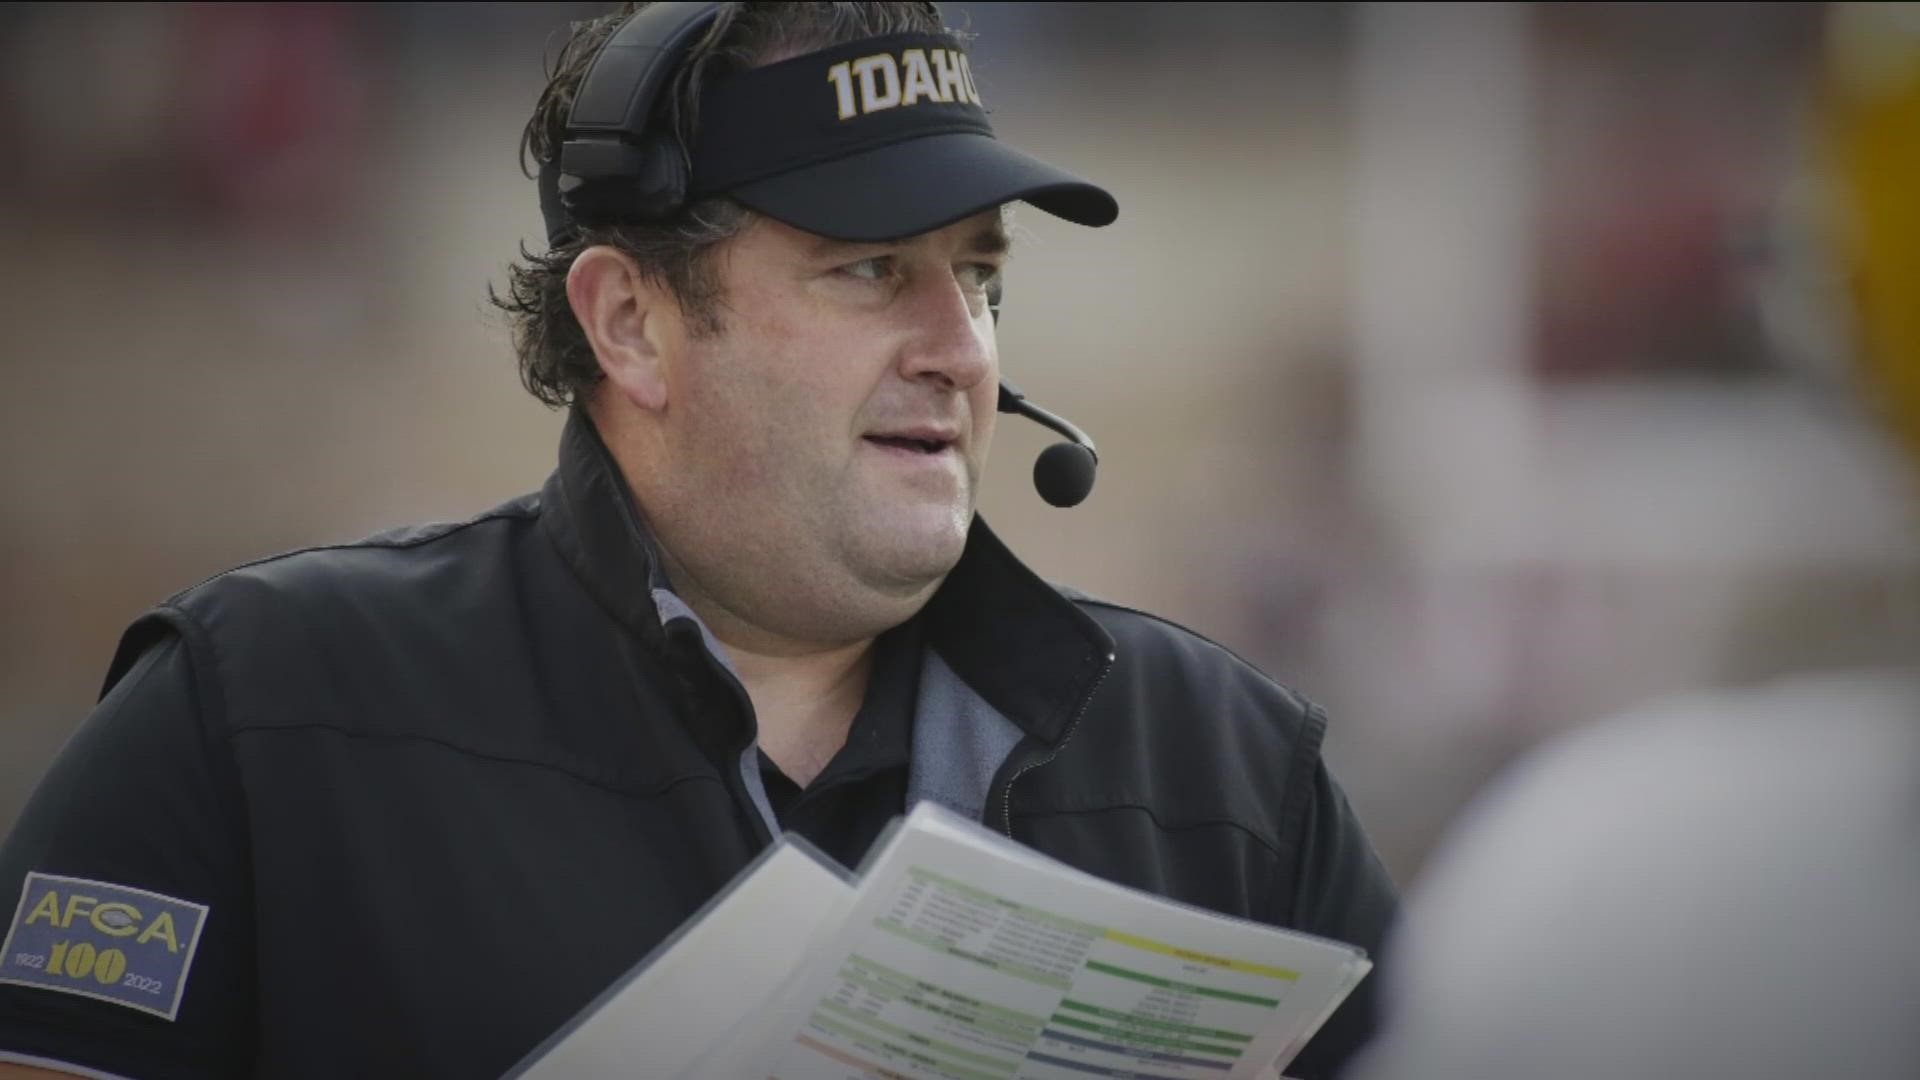 Idaho head coach Jason Eck told KTVB his staff is prioritizing recruiting in the northwest. The Vandals signed 13 players from the Gem State this week.